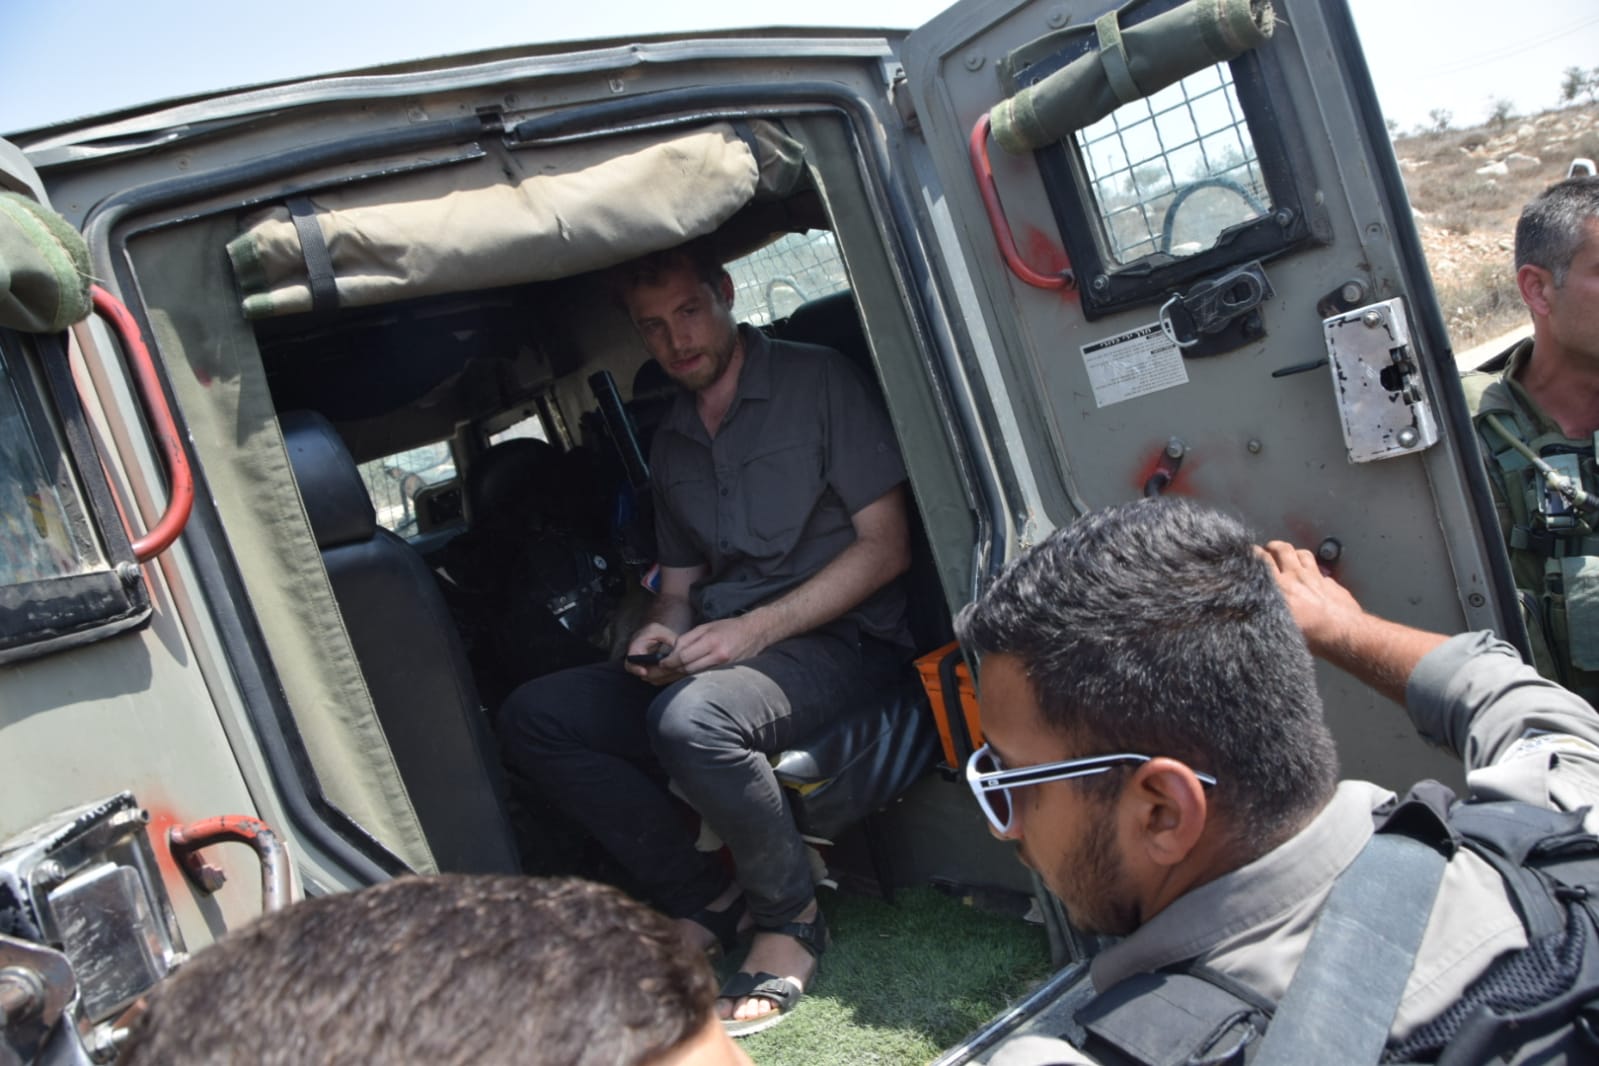 Israeli soldiers detaining Avner Gvaryahu, director of Breaking the Silence, on a tour of the South Hebron Hills, August 31, 2018. (Nasser Nawaja, B'Tselem)